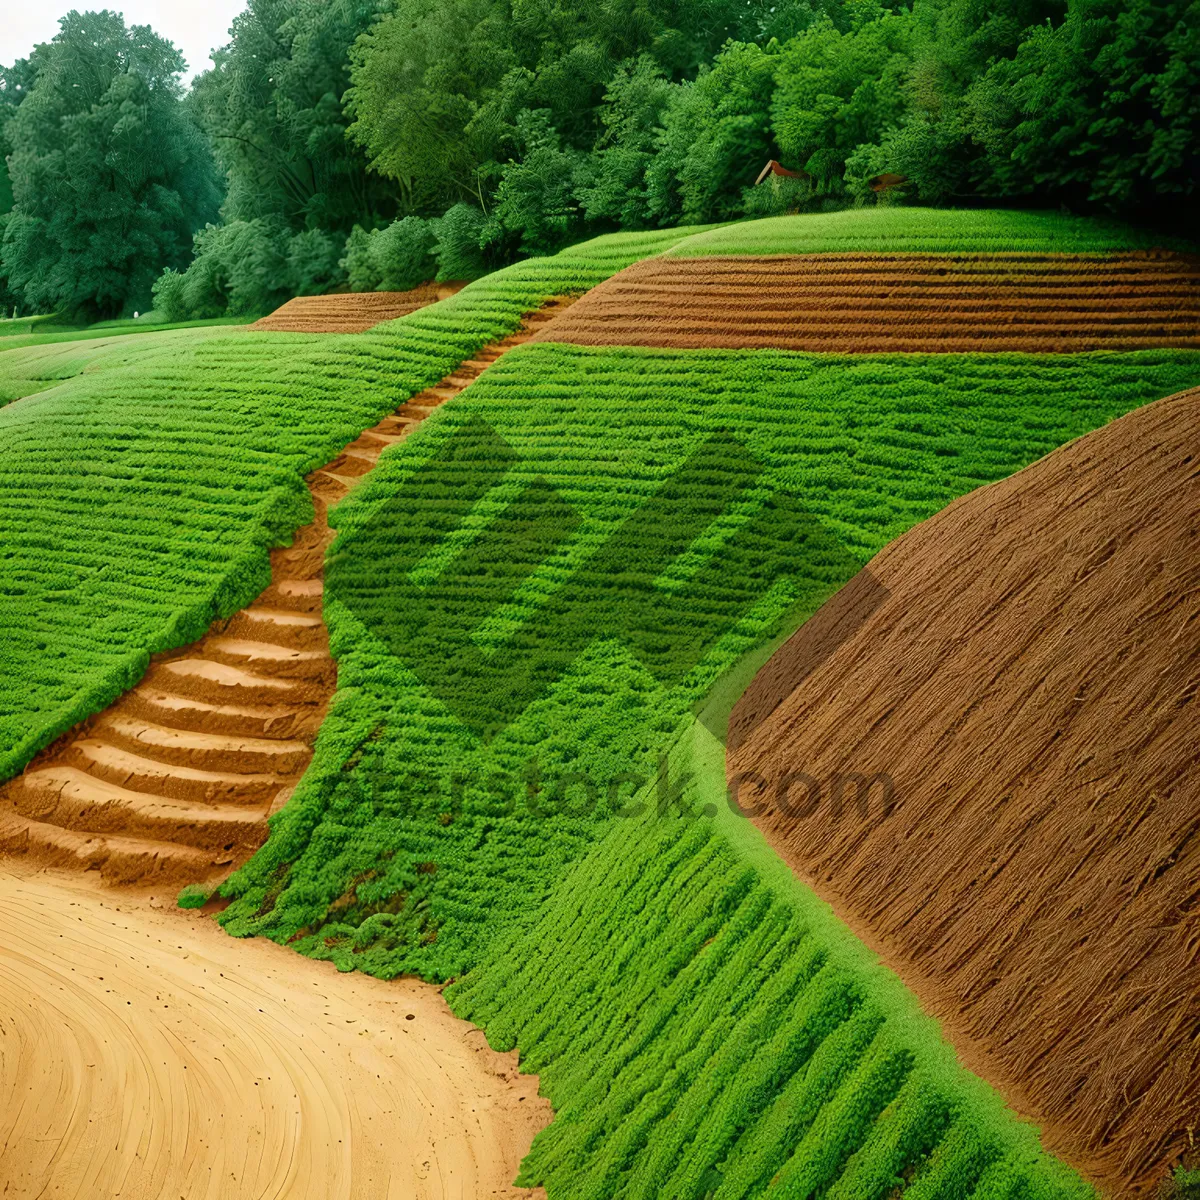 Picture of Idyllic Summer Farm Landscape with Rice Field and Maze